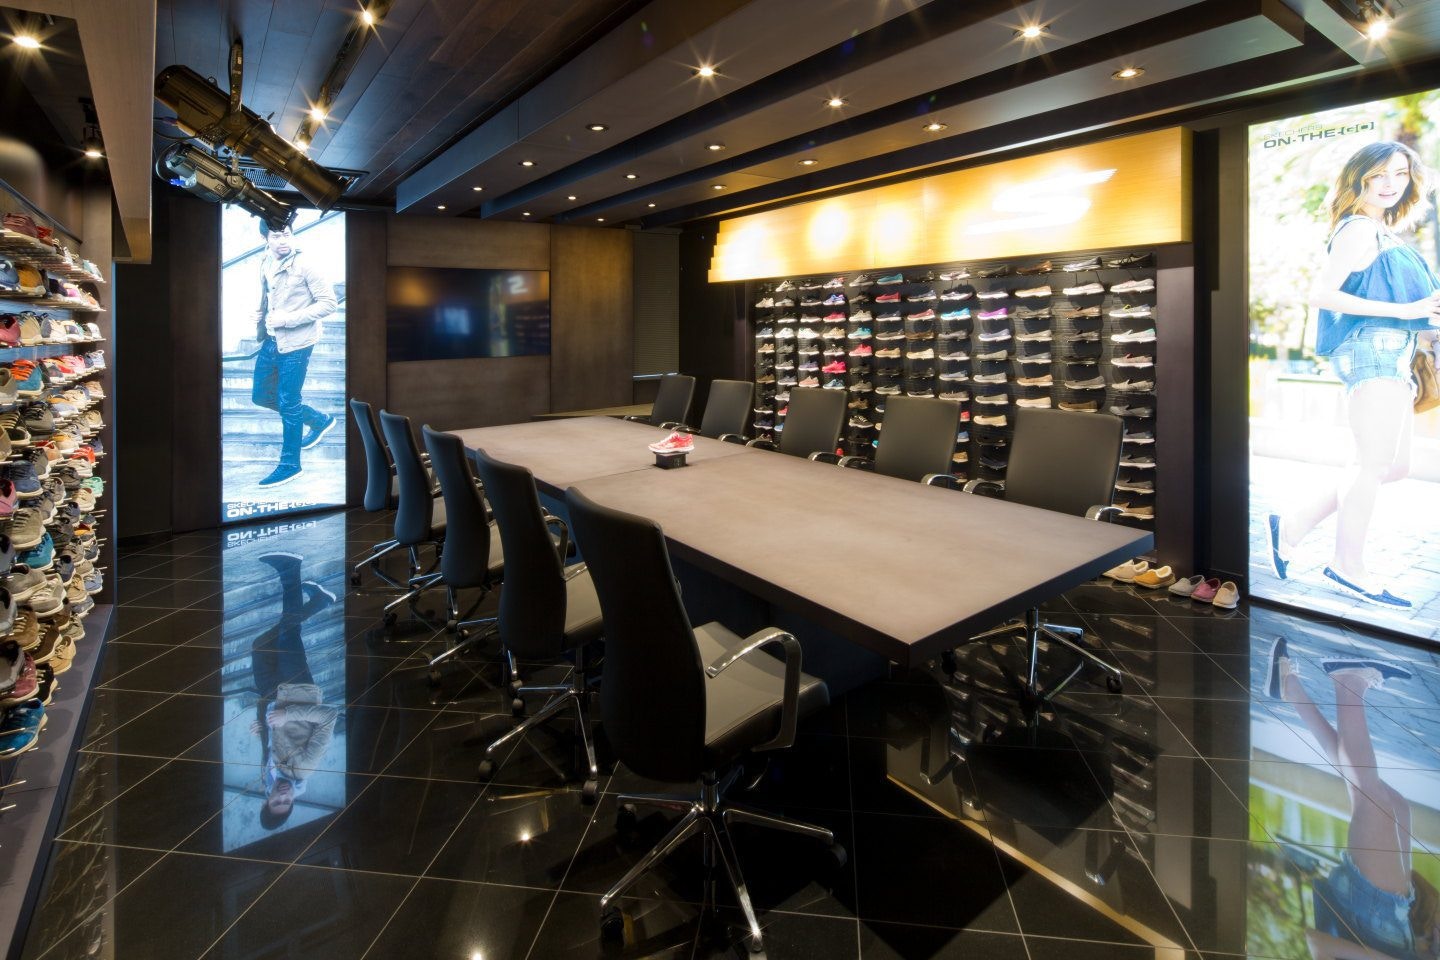 Sketchers boardroom with shoes displays